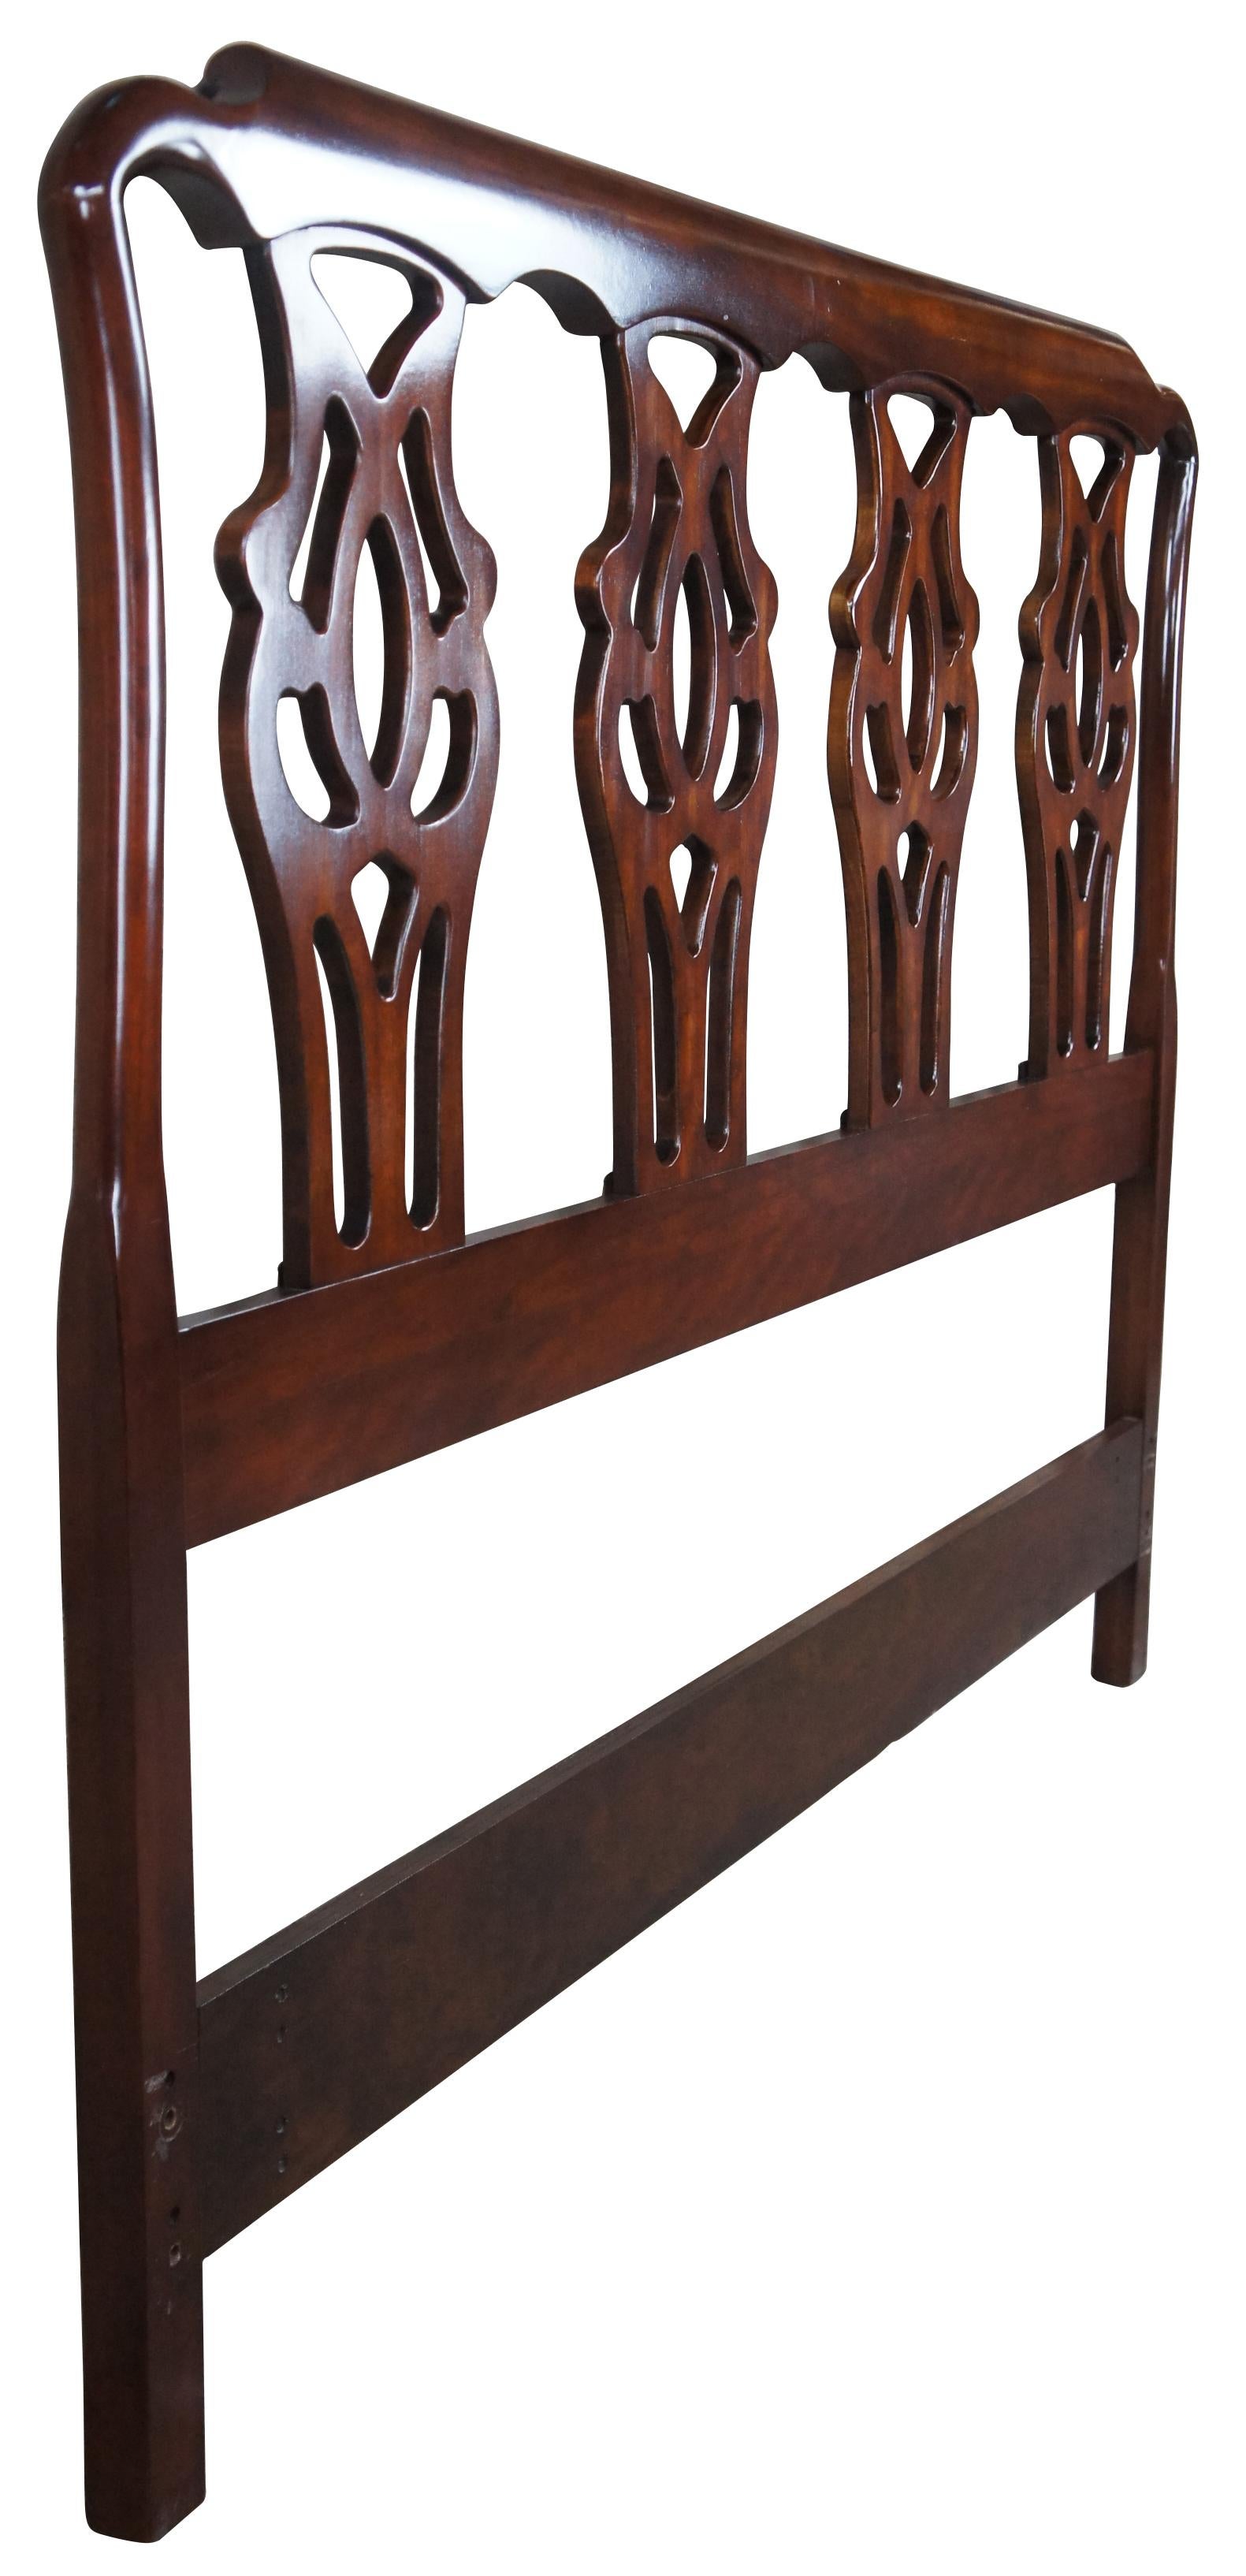 Circa 1960s Chippendale headboard by Pennsylvania House. Made from Cherry with an interlaced splat back.
 